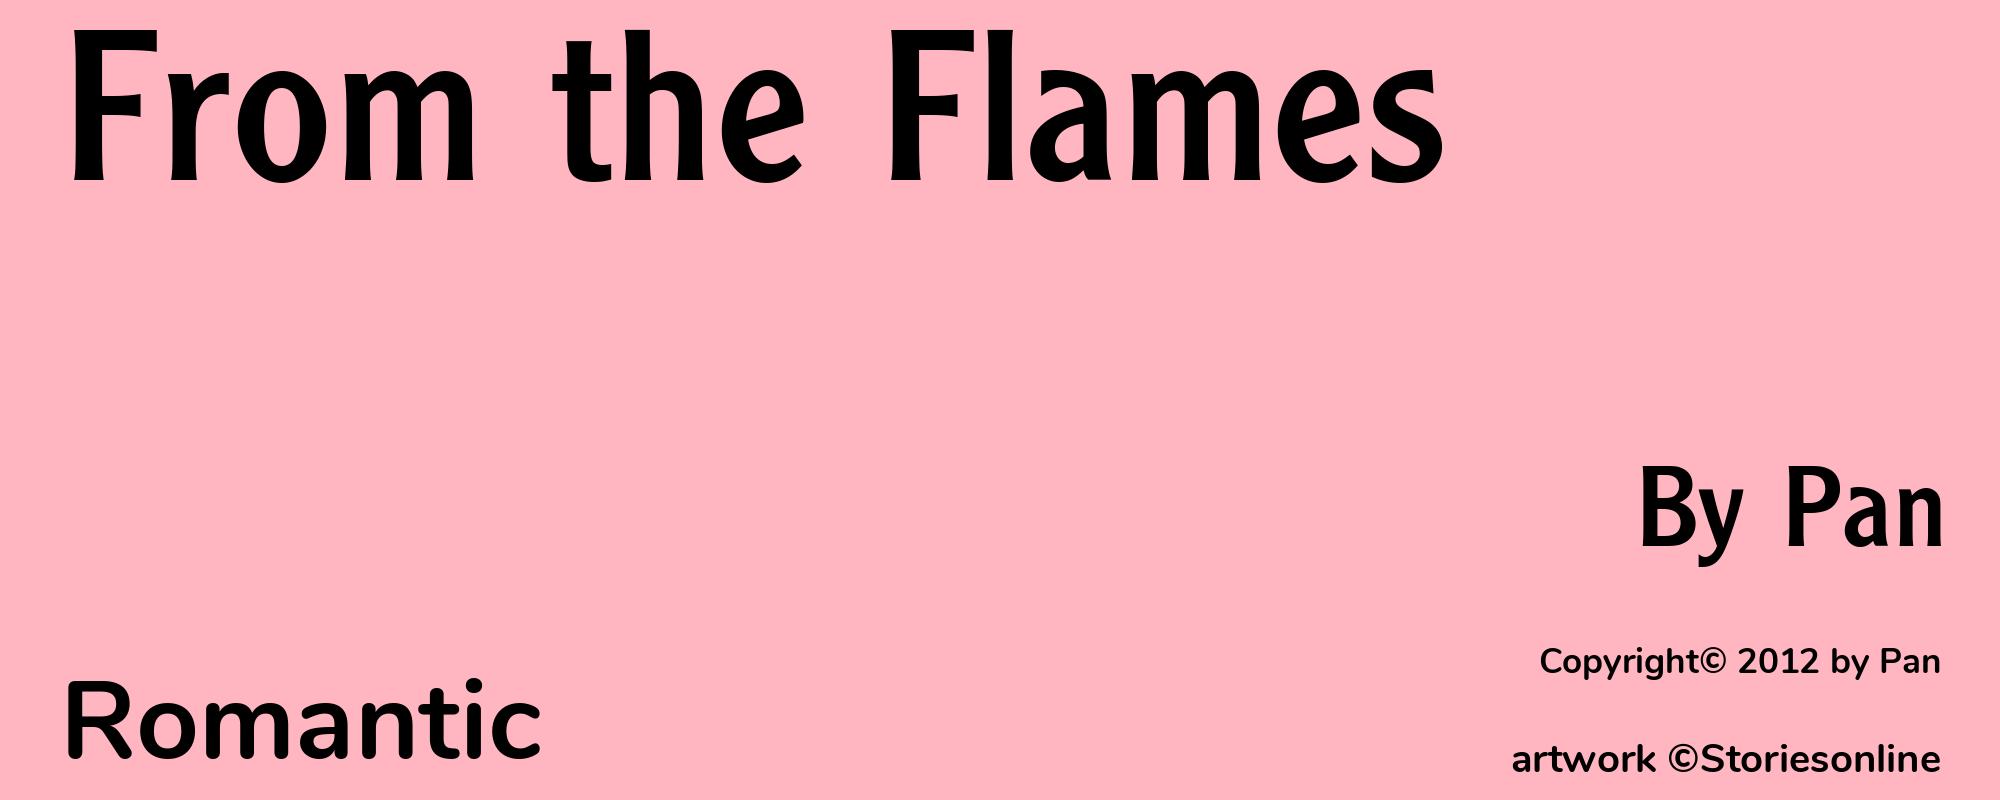 From the Flames - Cover